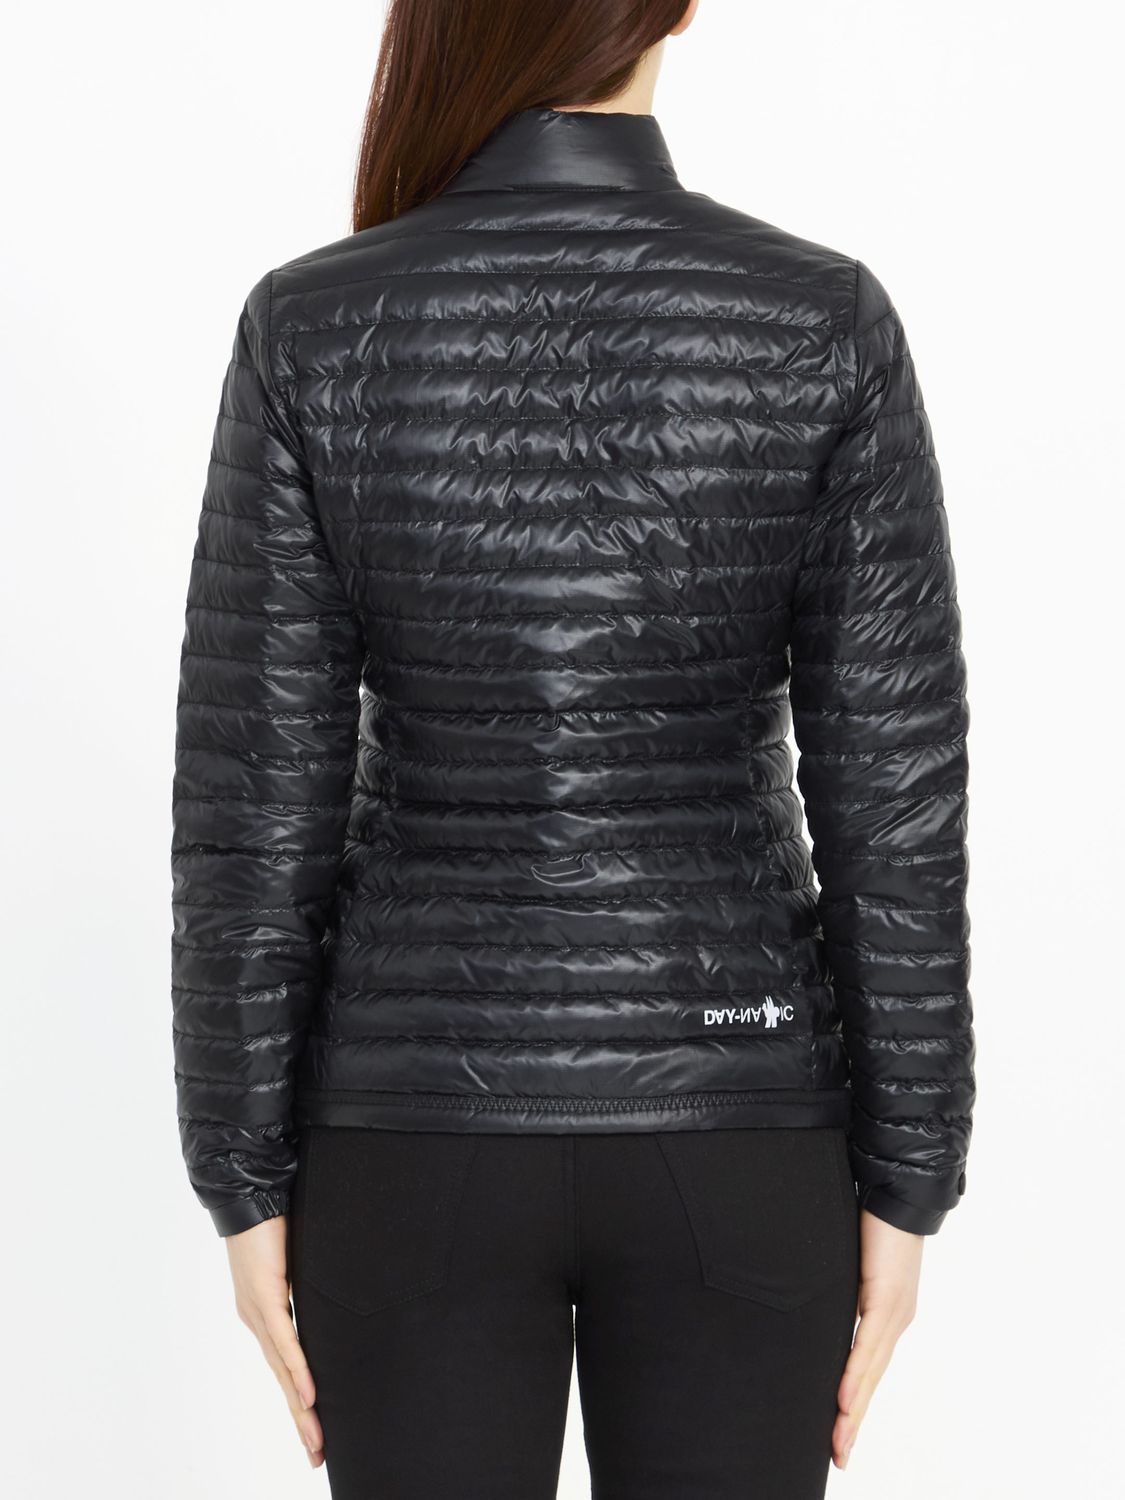 MONCLER GRENOBLE Black Short Down Jacket for Women - Quilted Nylon with High Collar and Logo Patch